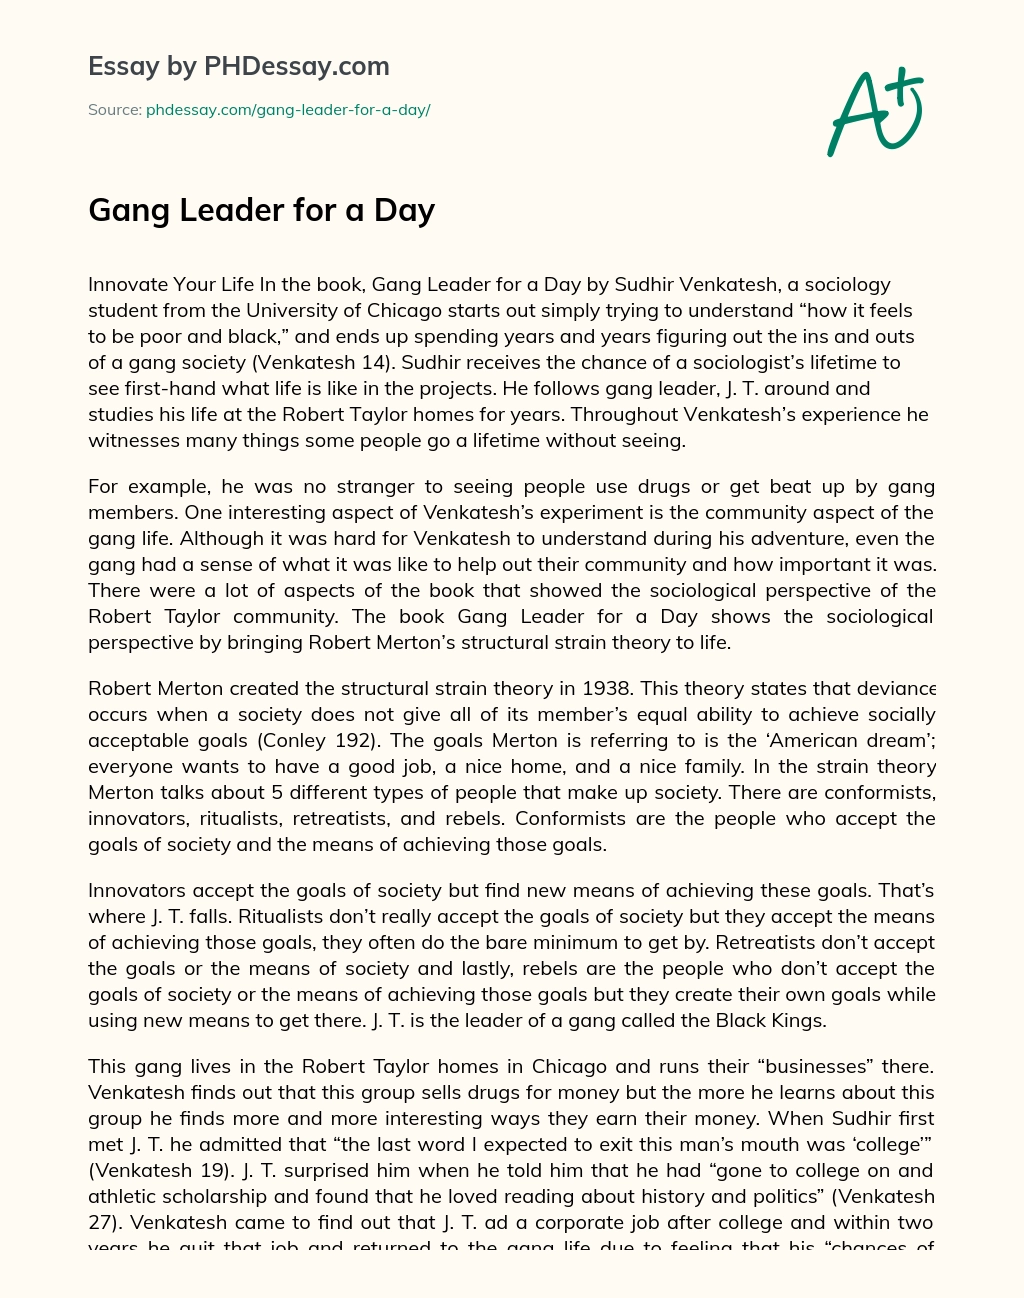 Gang Leader for a Day essay